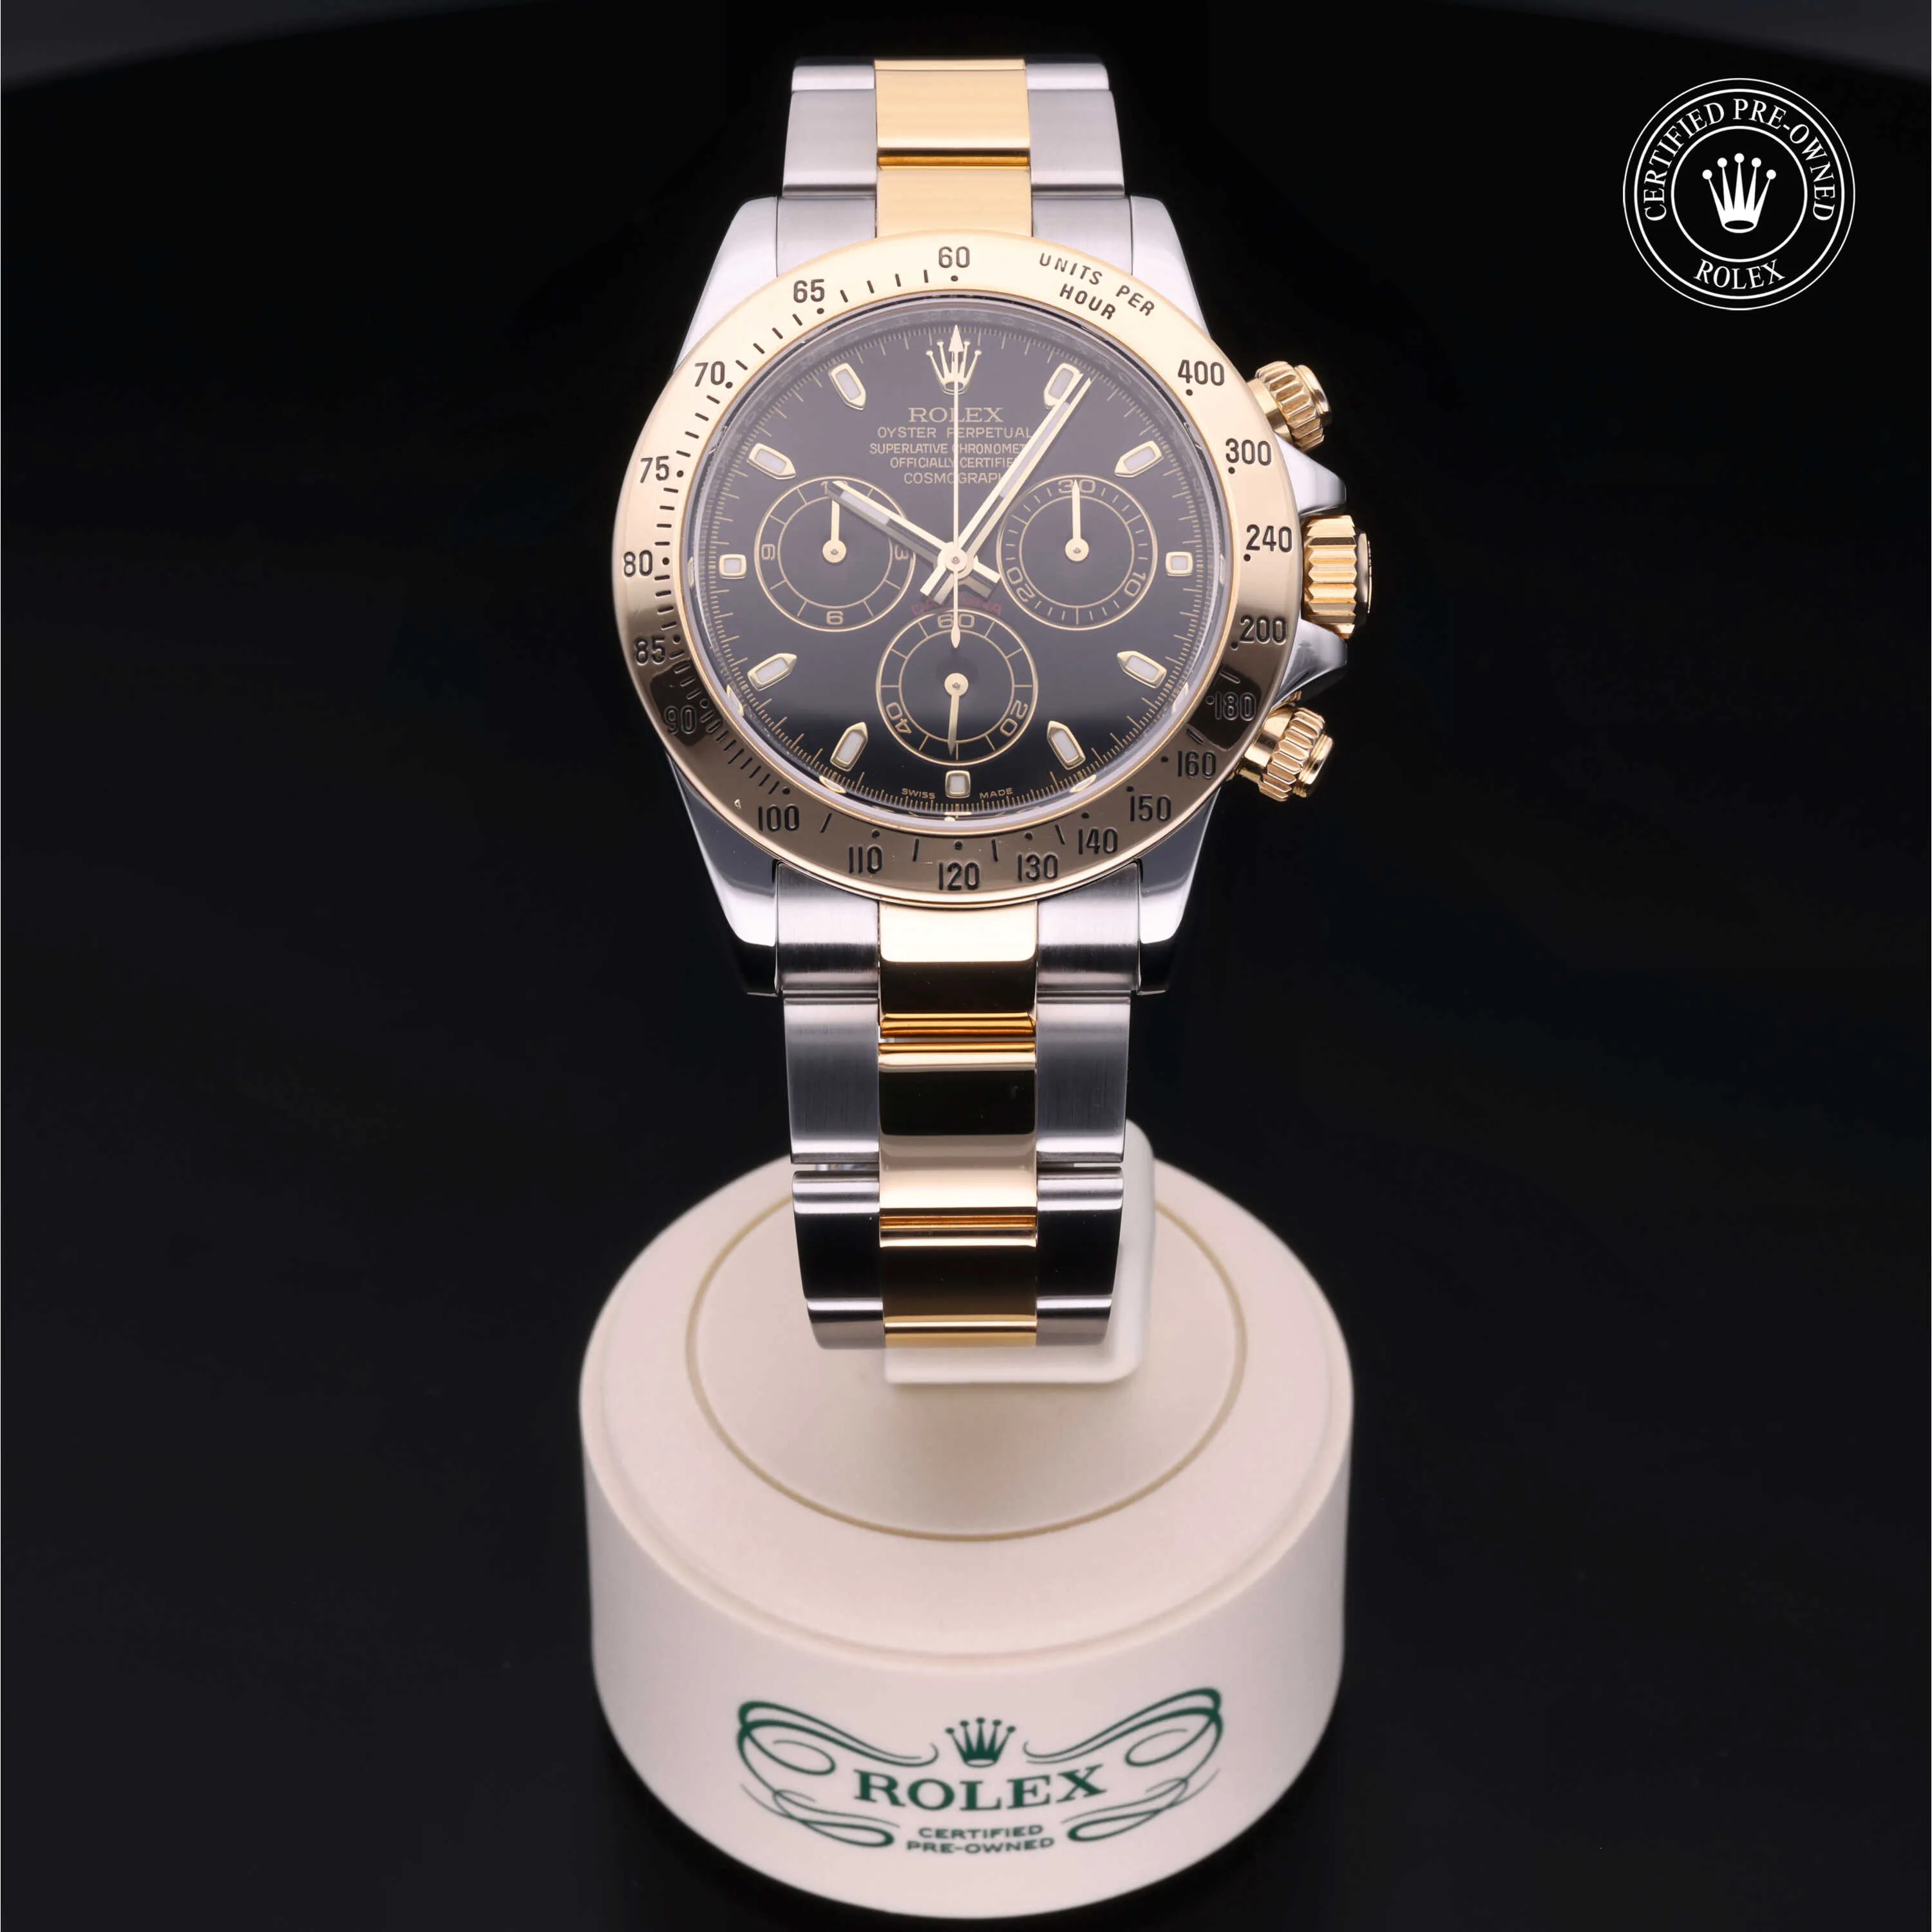 Rolex Daytona 116523 40mm Yellow gold and stainless steel Black 2